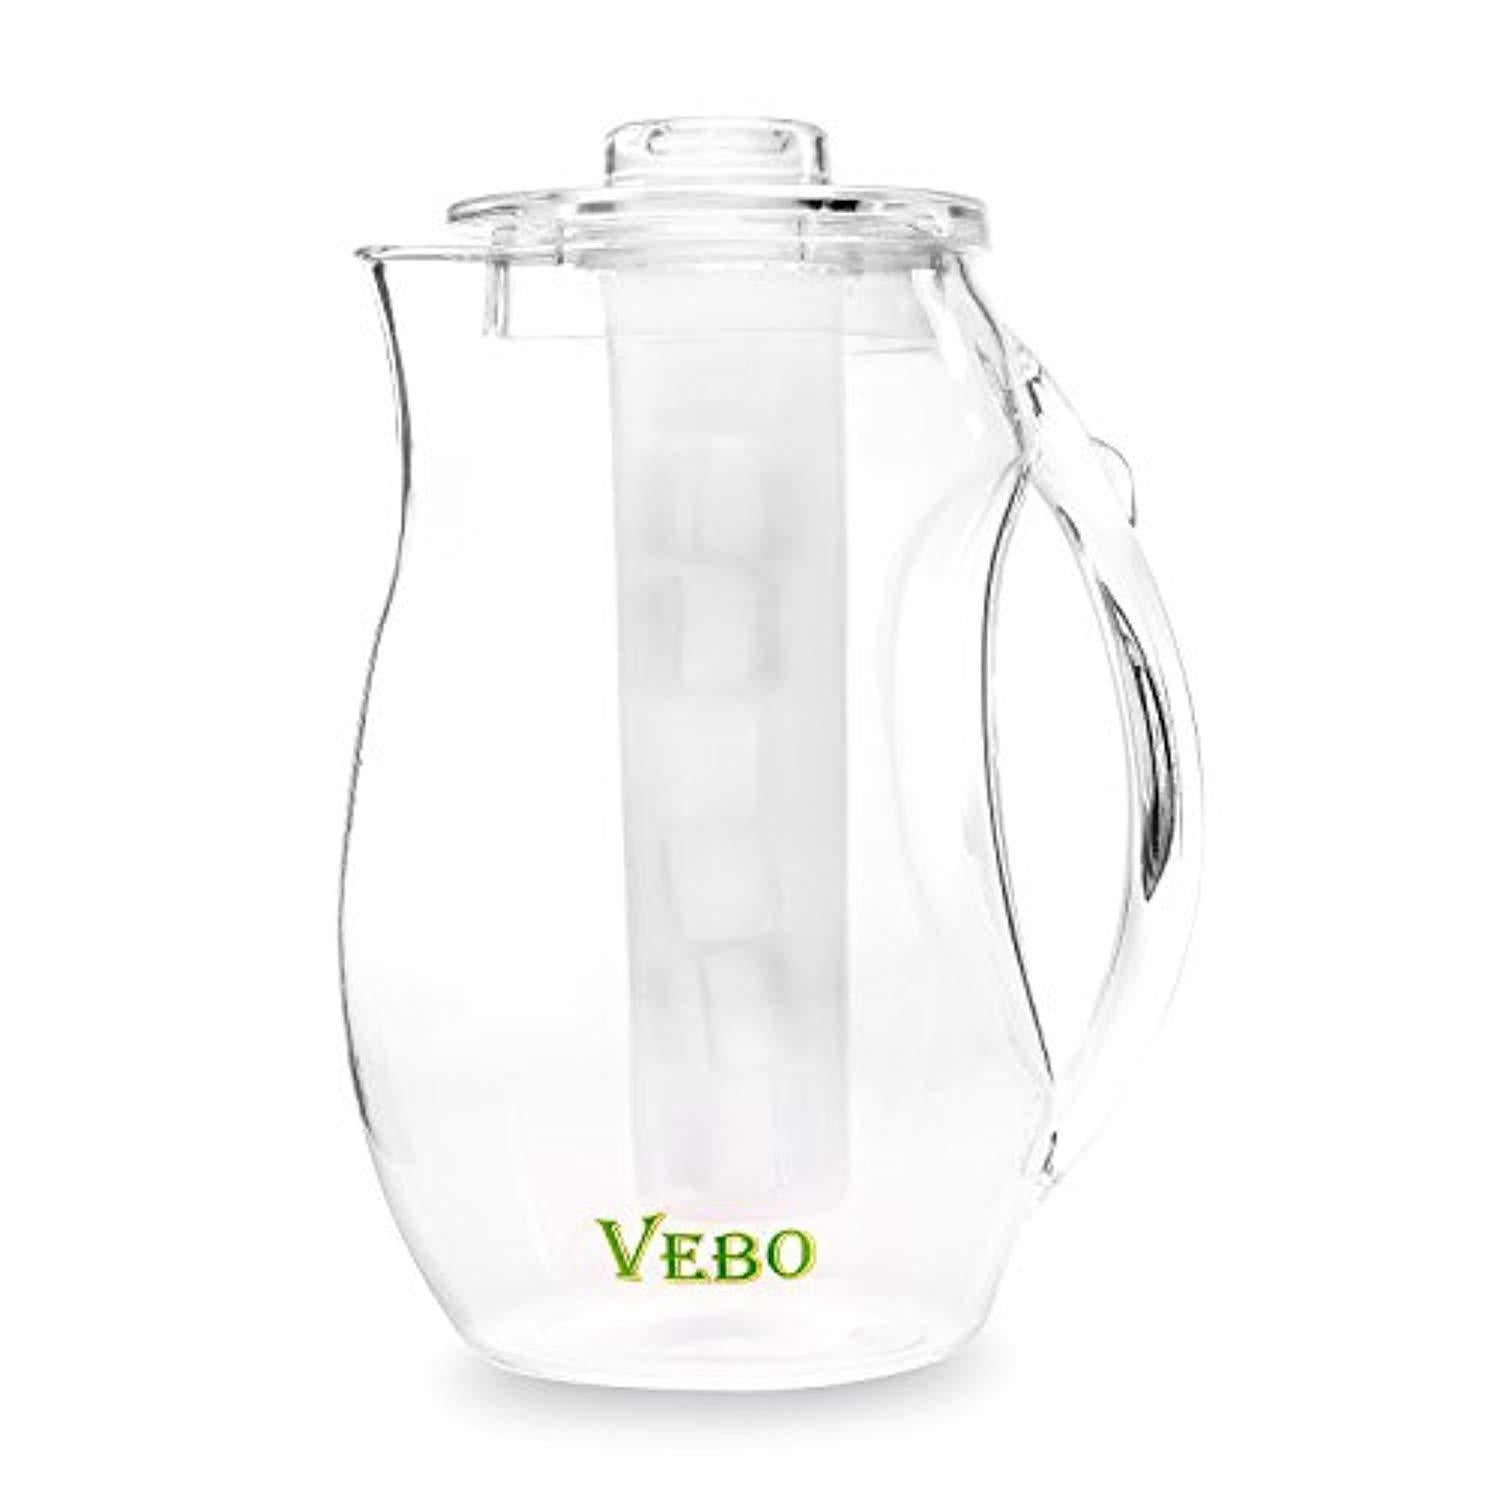 Chef's INSPIRATIONS Fruit Infusion Water Pitcher. 2.9 Quart (2.75 Liters)